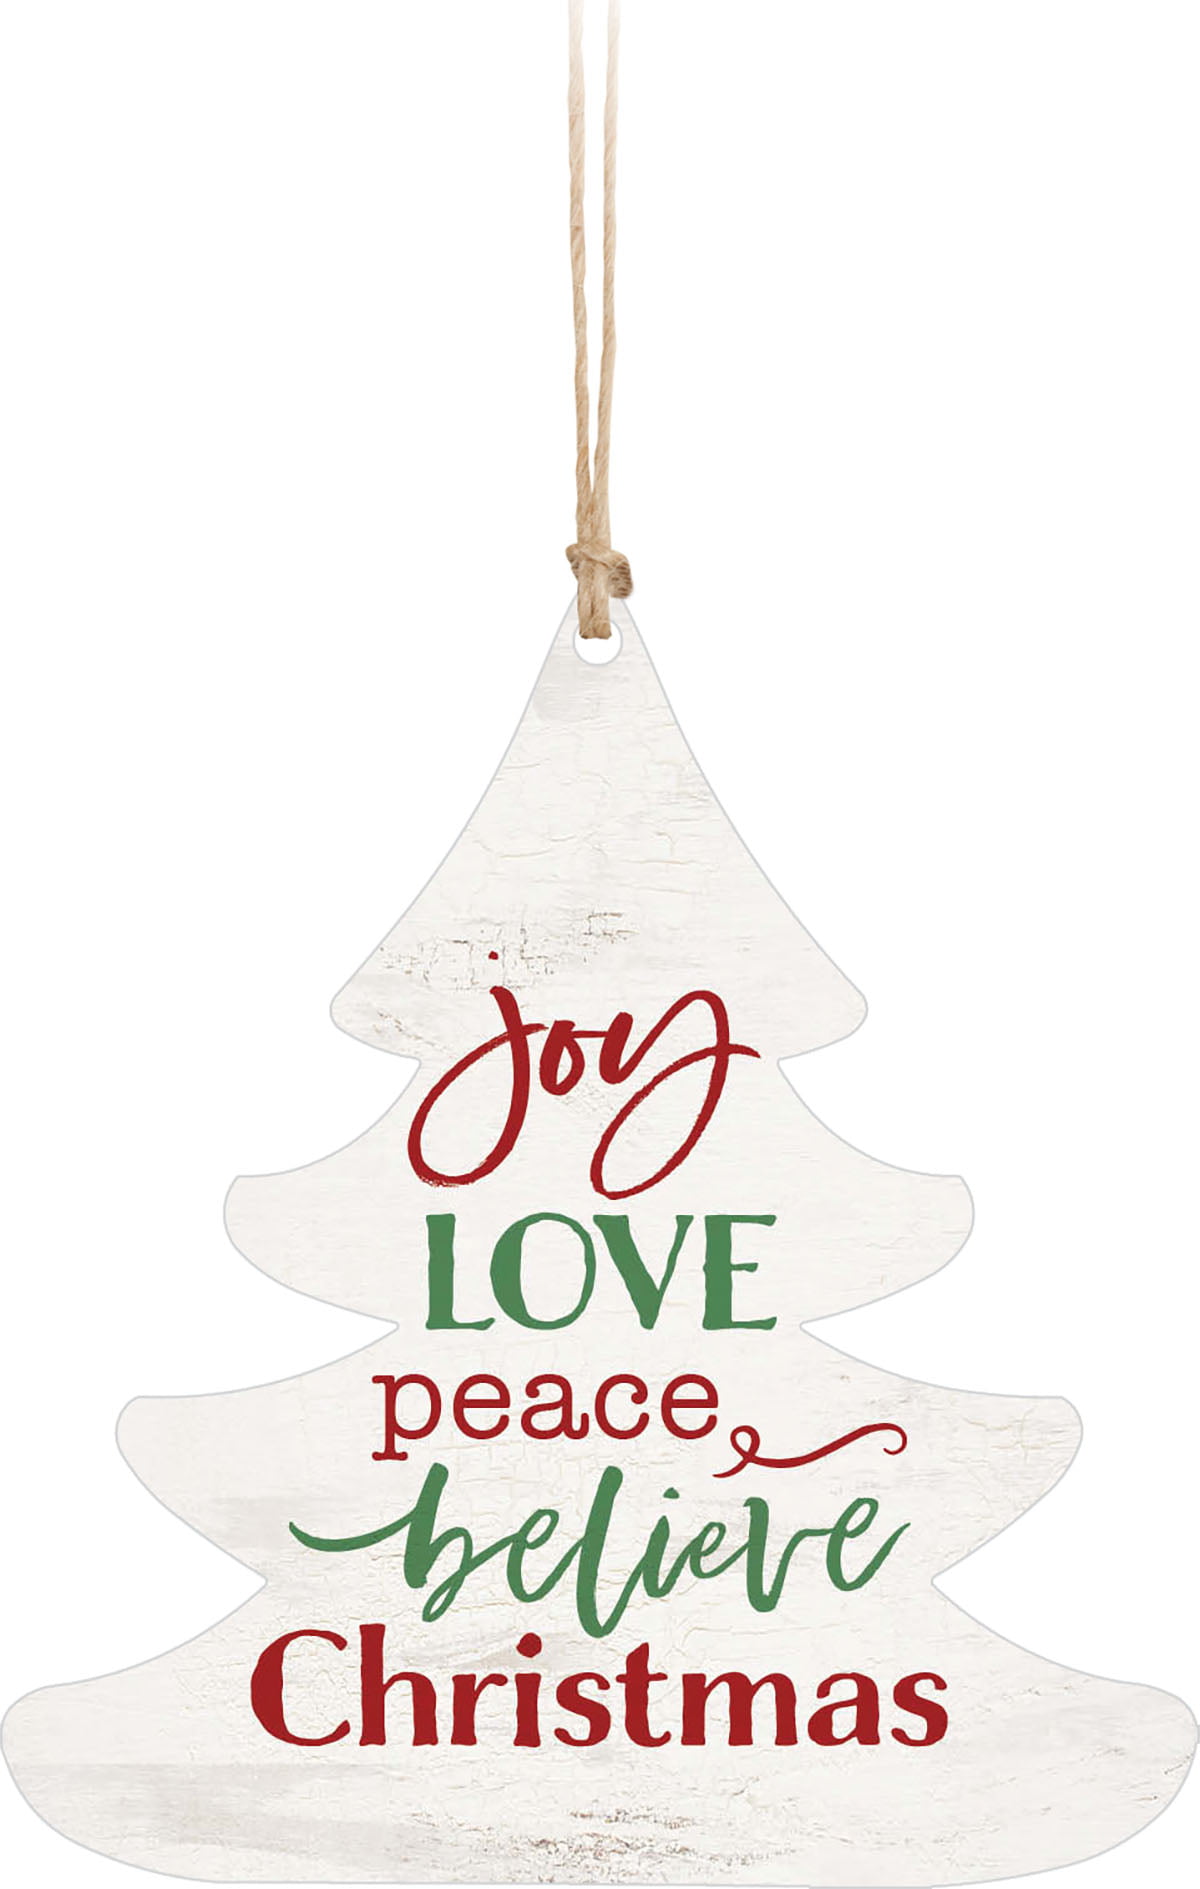 Cottage Holiday Farmhouse Decor Peace Christmas Ornament Set Tree Hanging Decorations by Christmas Market Ornaments 2 Wood Pieces - Peace on Earth & Merry Christmas 